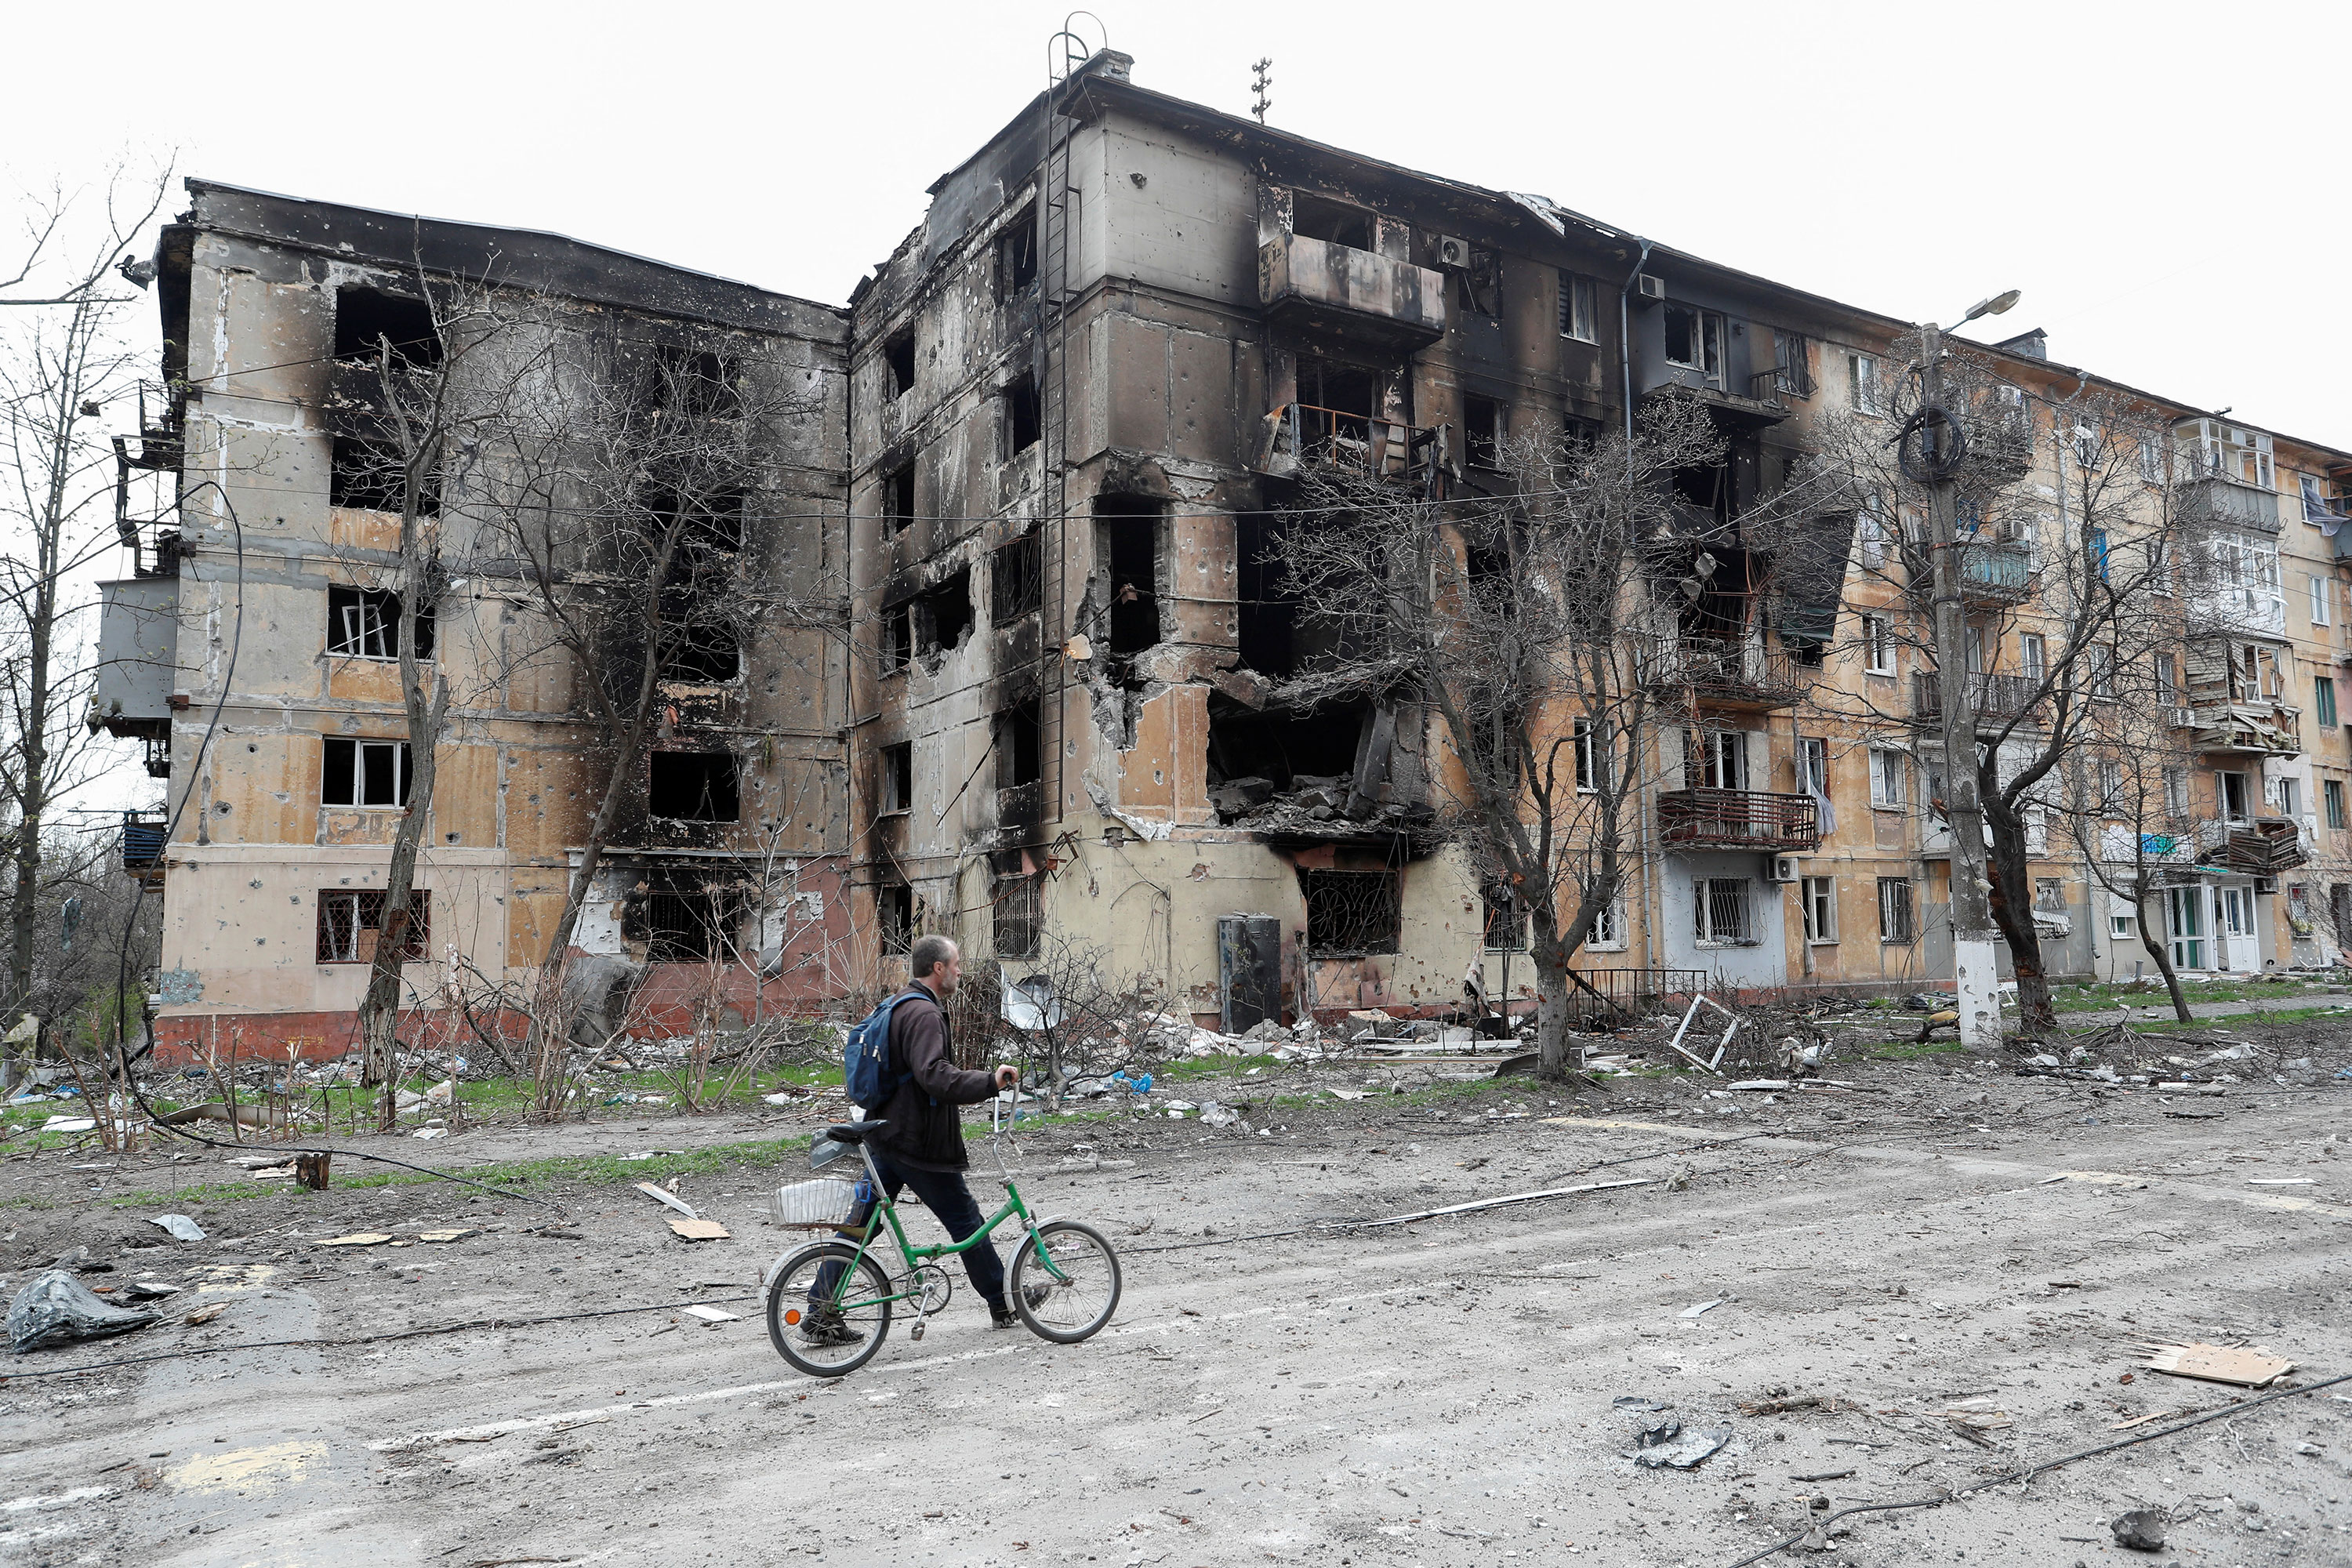 A man walks past a heavily-damaged residential building in Mariupol, Ukraine, on April 18.